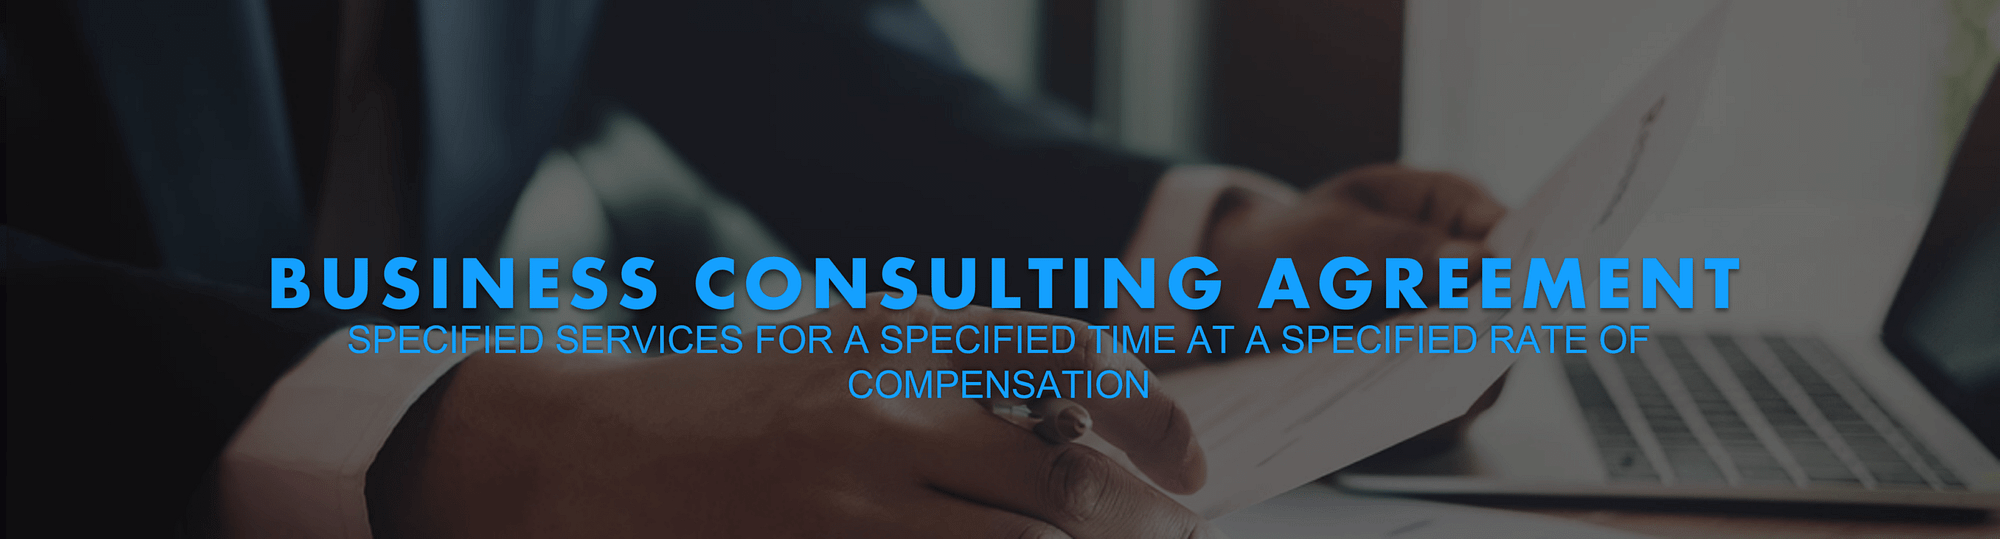 Our Business Consulting Agreements are for certain specified services for a specified time at a specified rate of compensation from BusinessGuru-TerryHHill.com